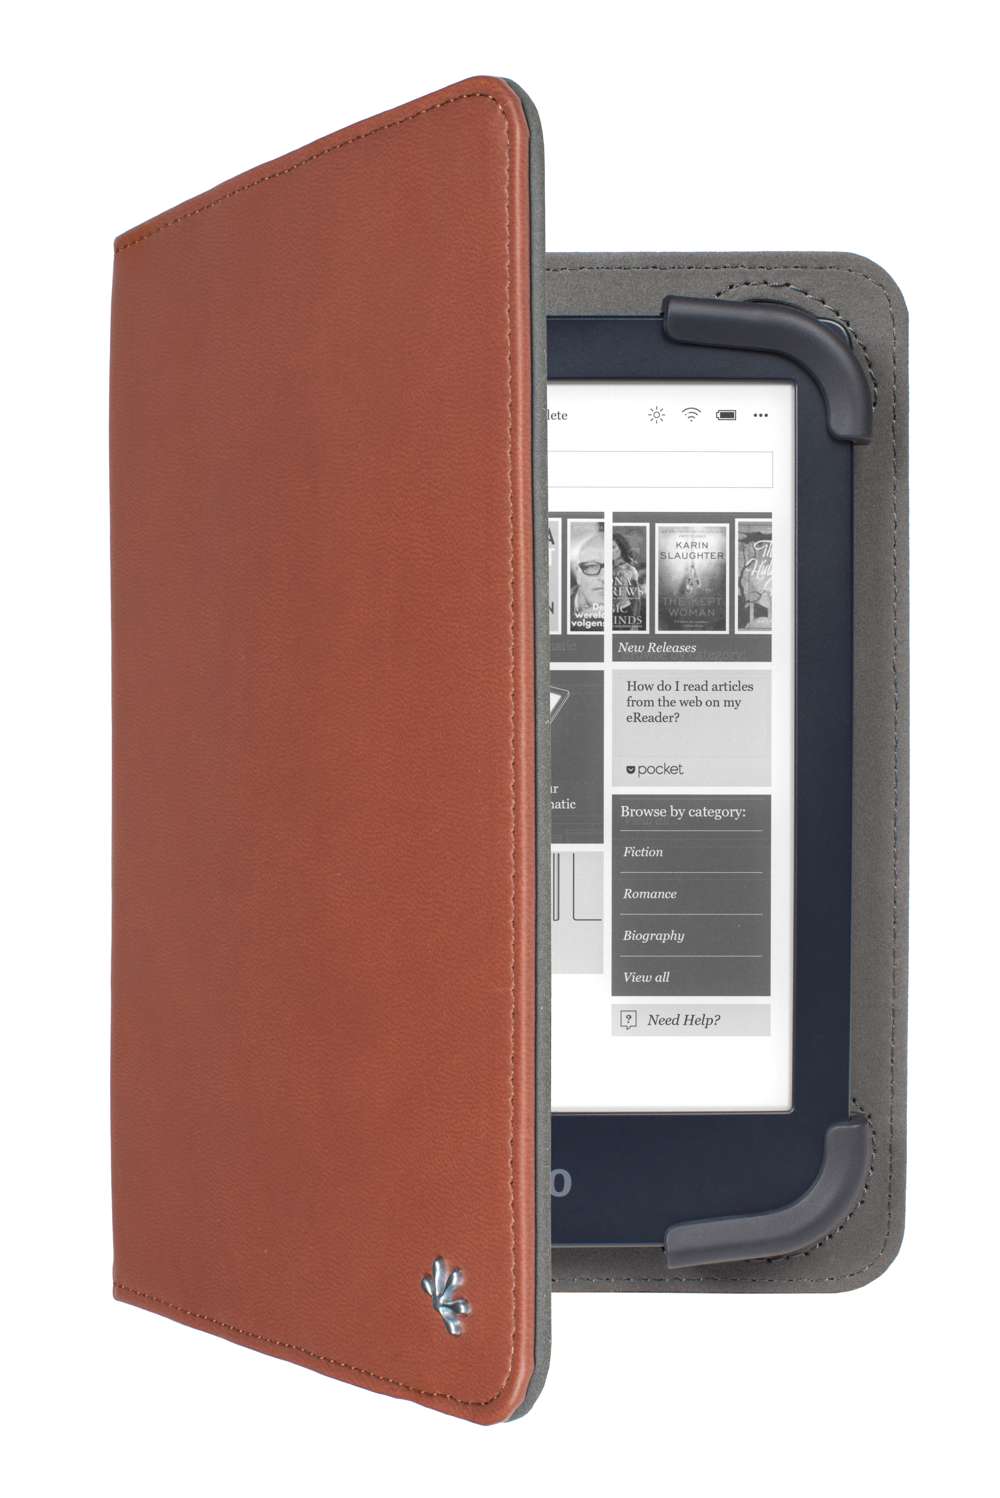 Universal e-reader/tablet case - 6 inch devices